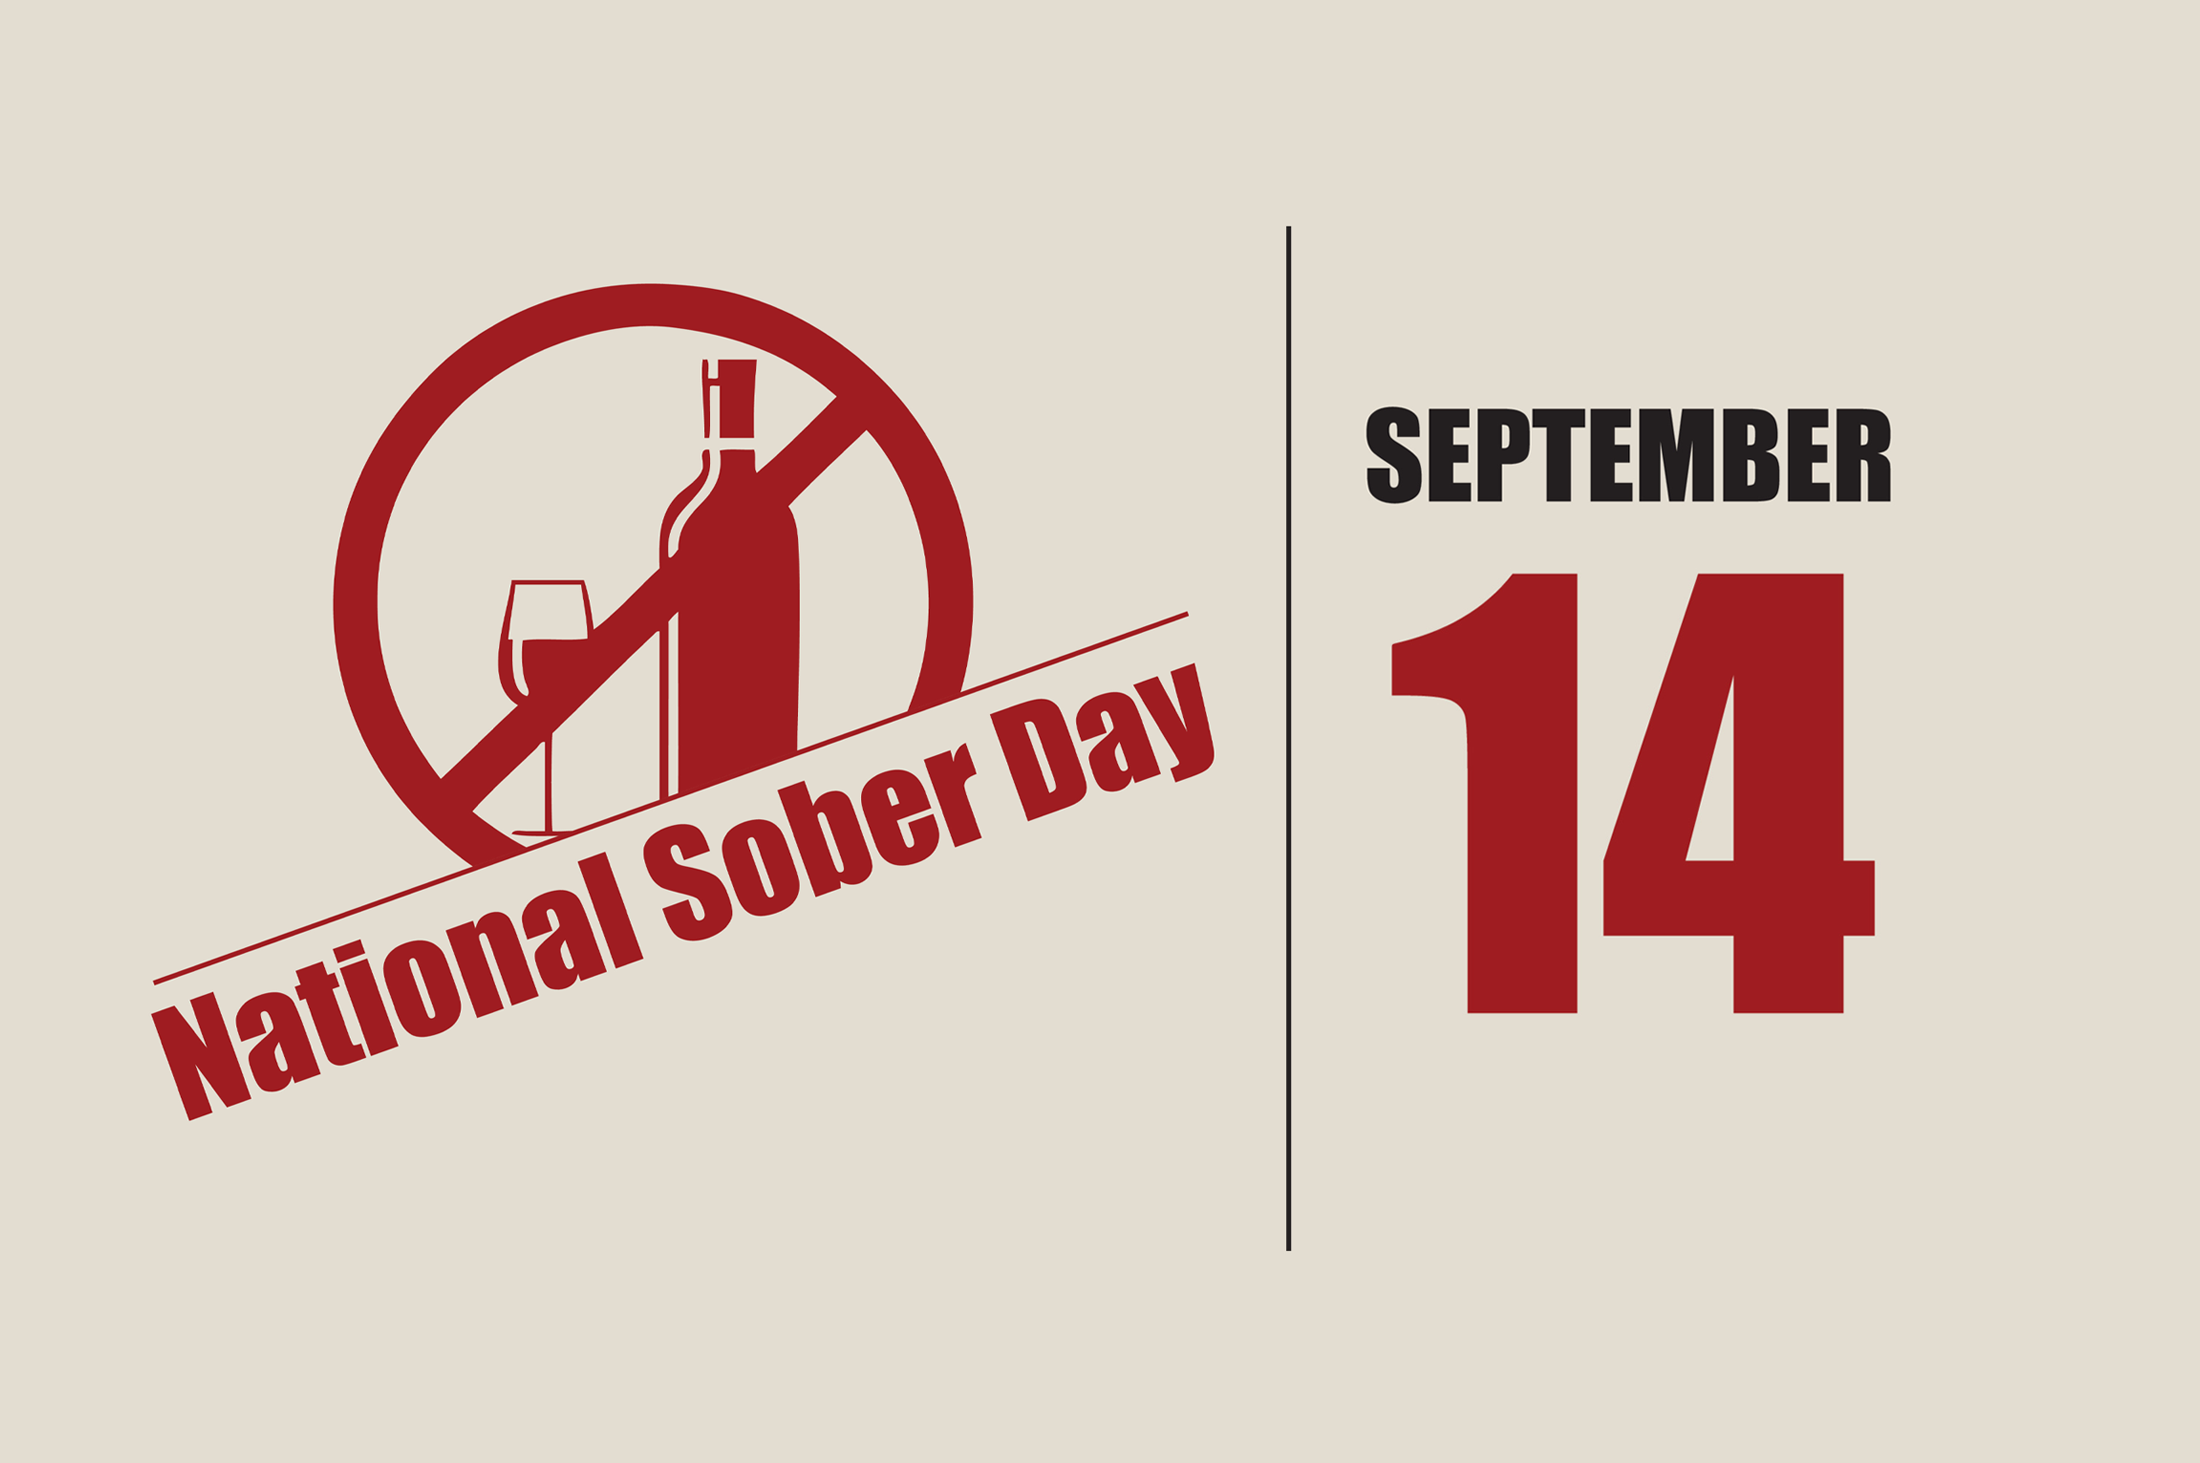 National Sober Day Celebrating the Power of Sobriety Together!